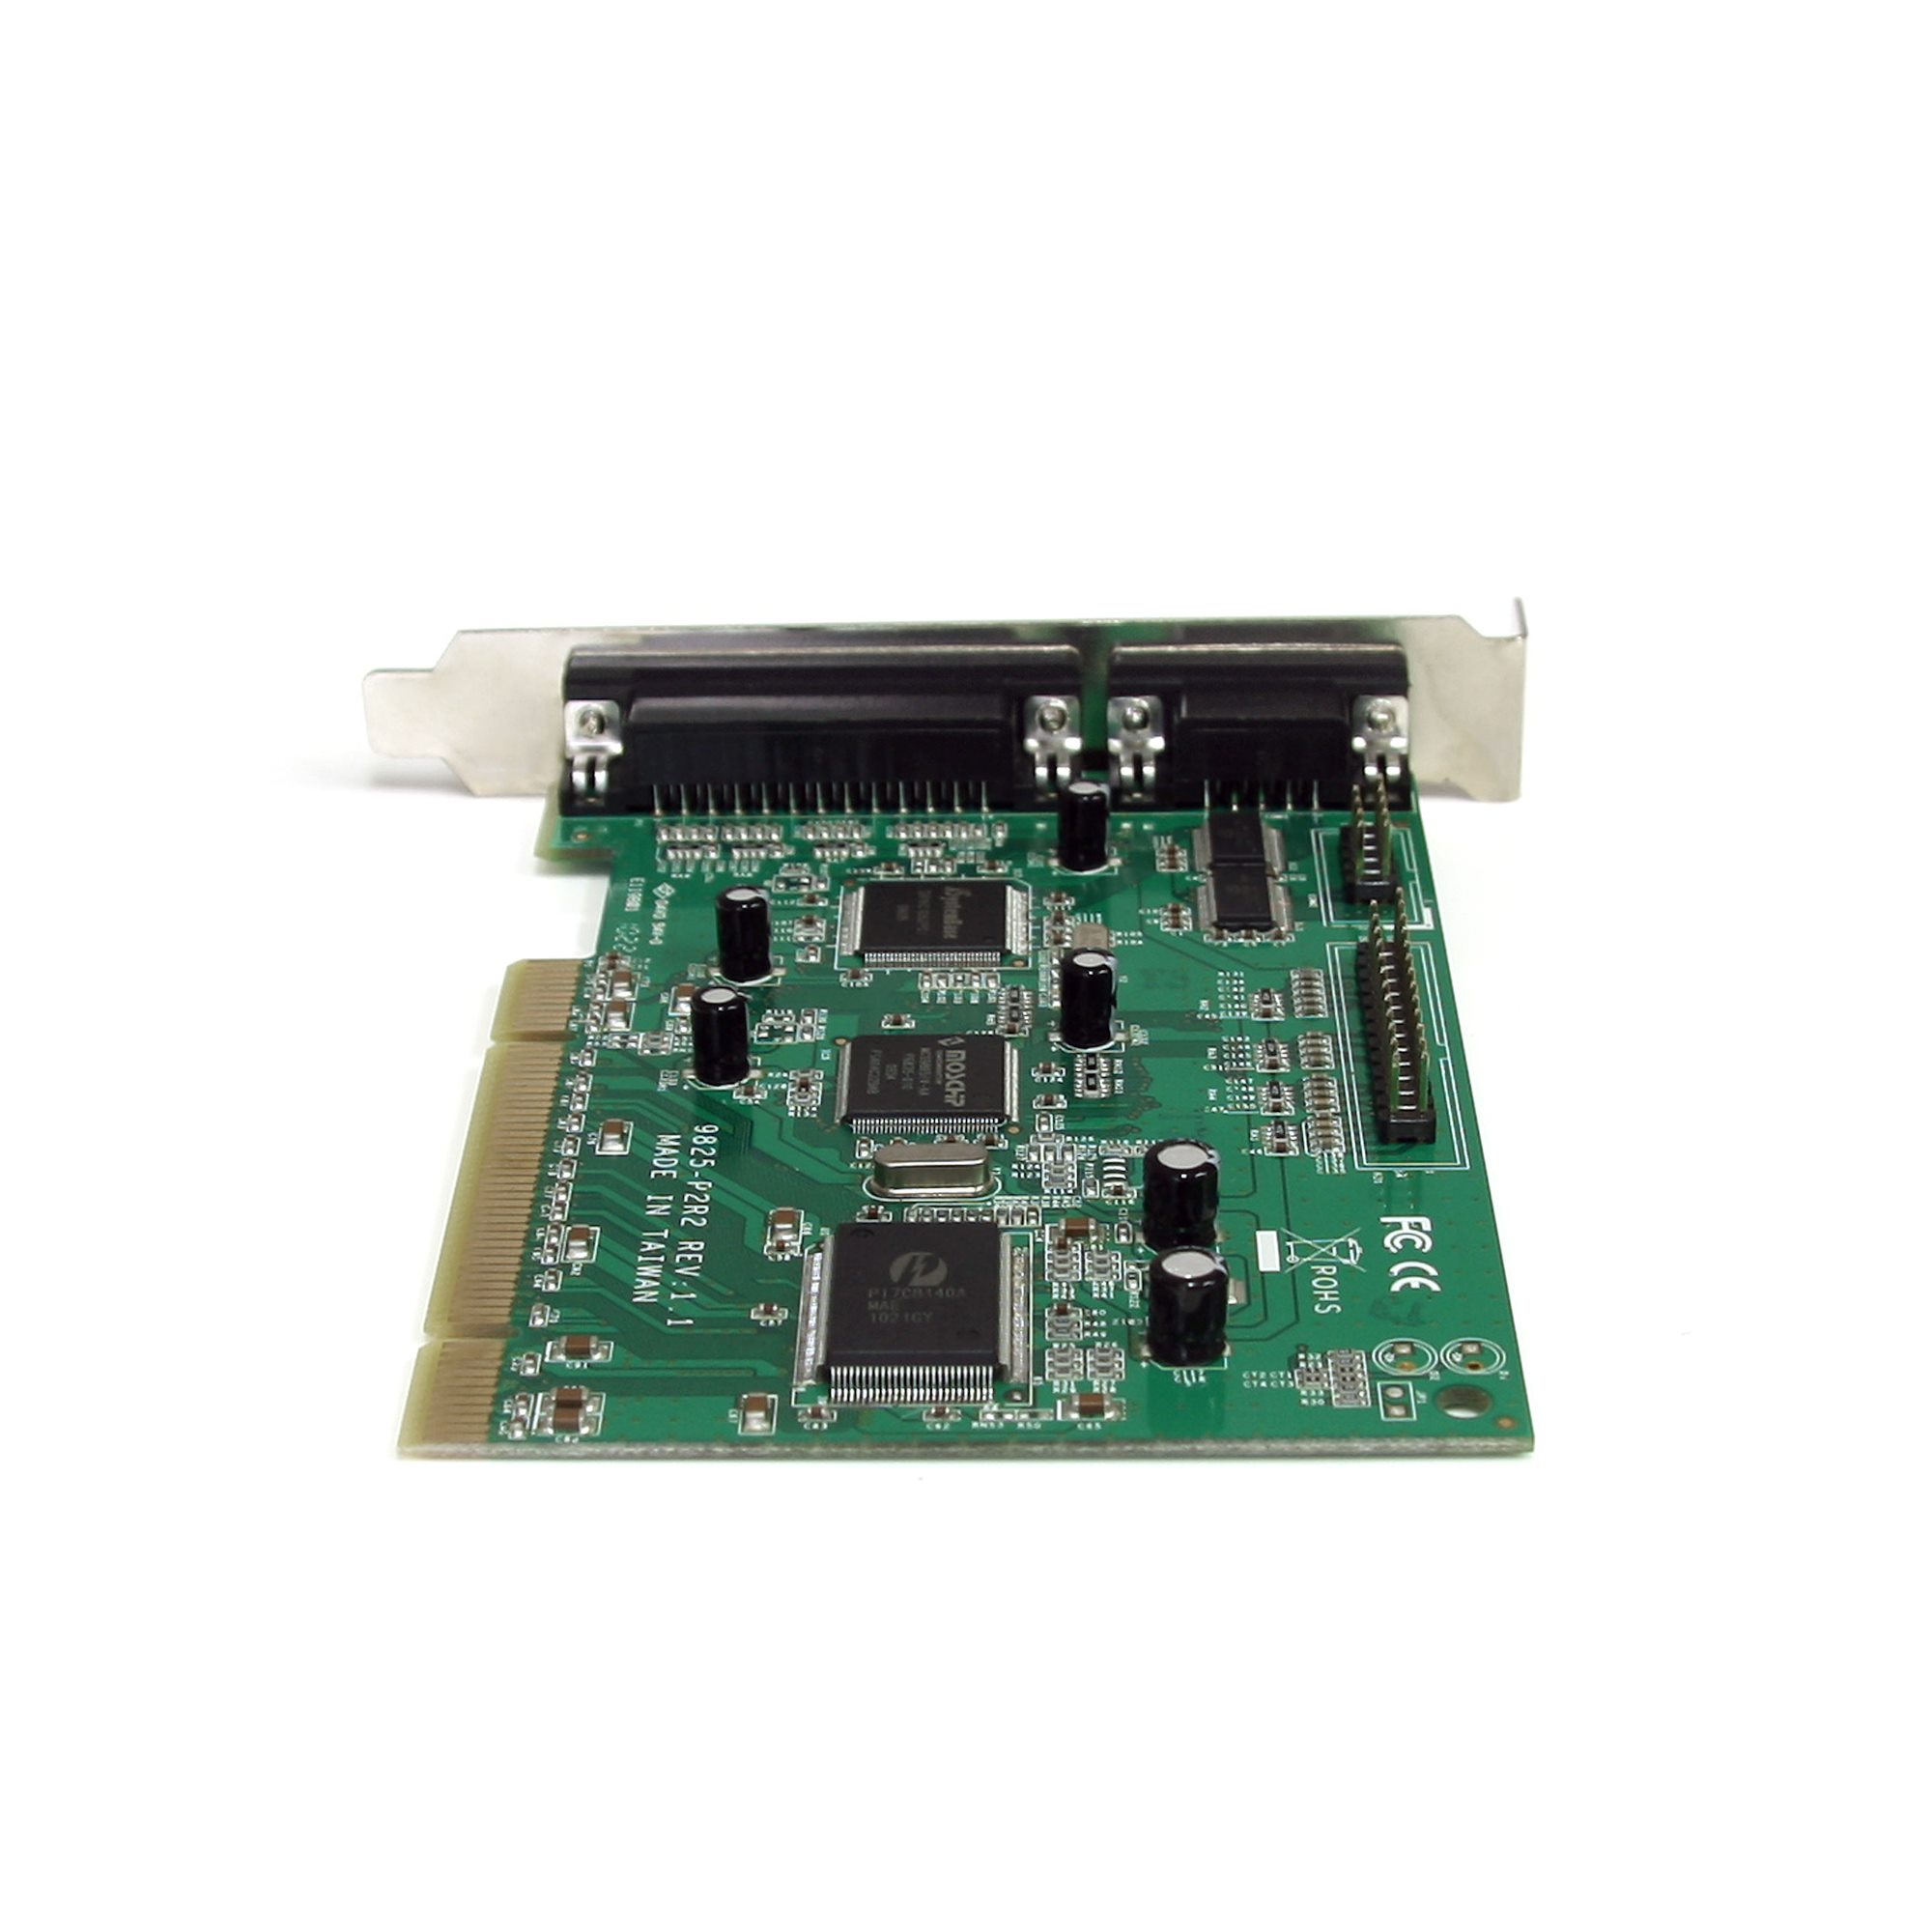 StarTech.com PCI2S2PMC 2S2P PCI Serial Parallel Combo Card with 16C1050 UART 